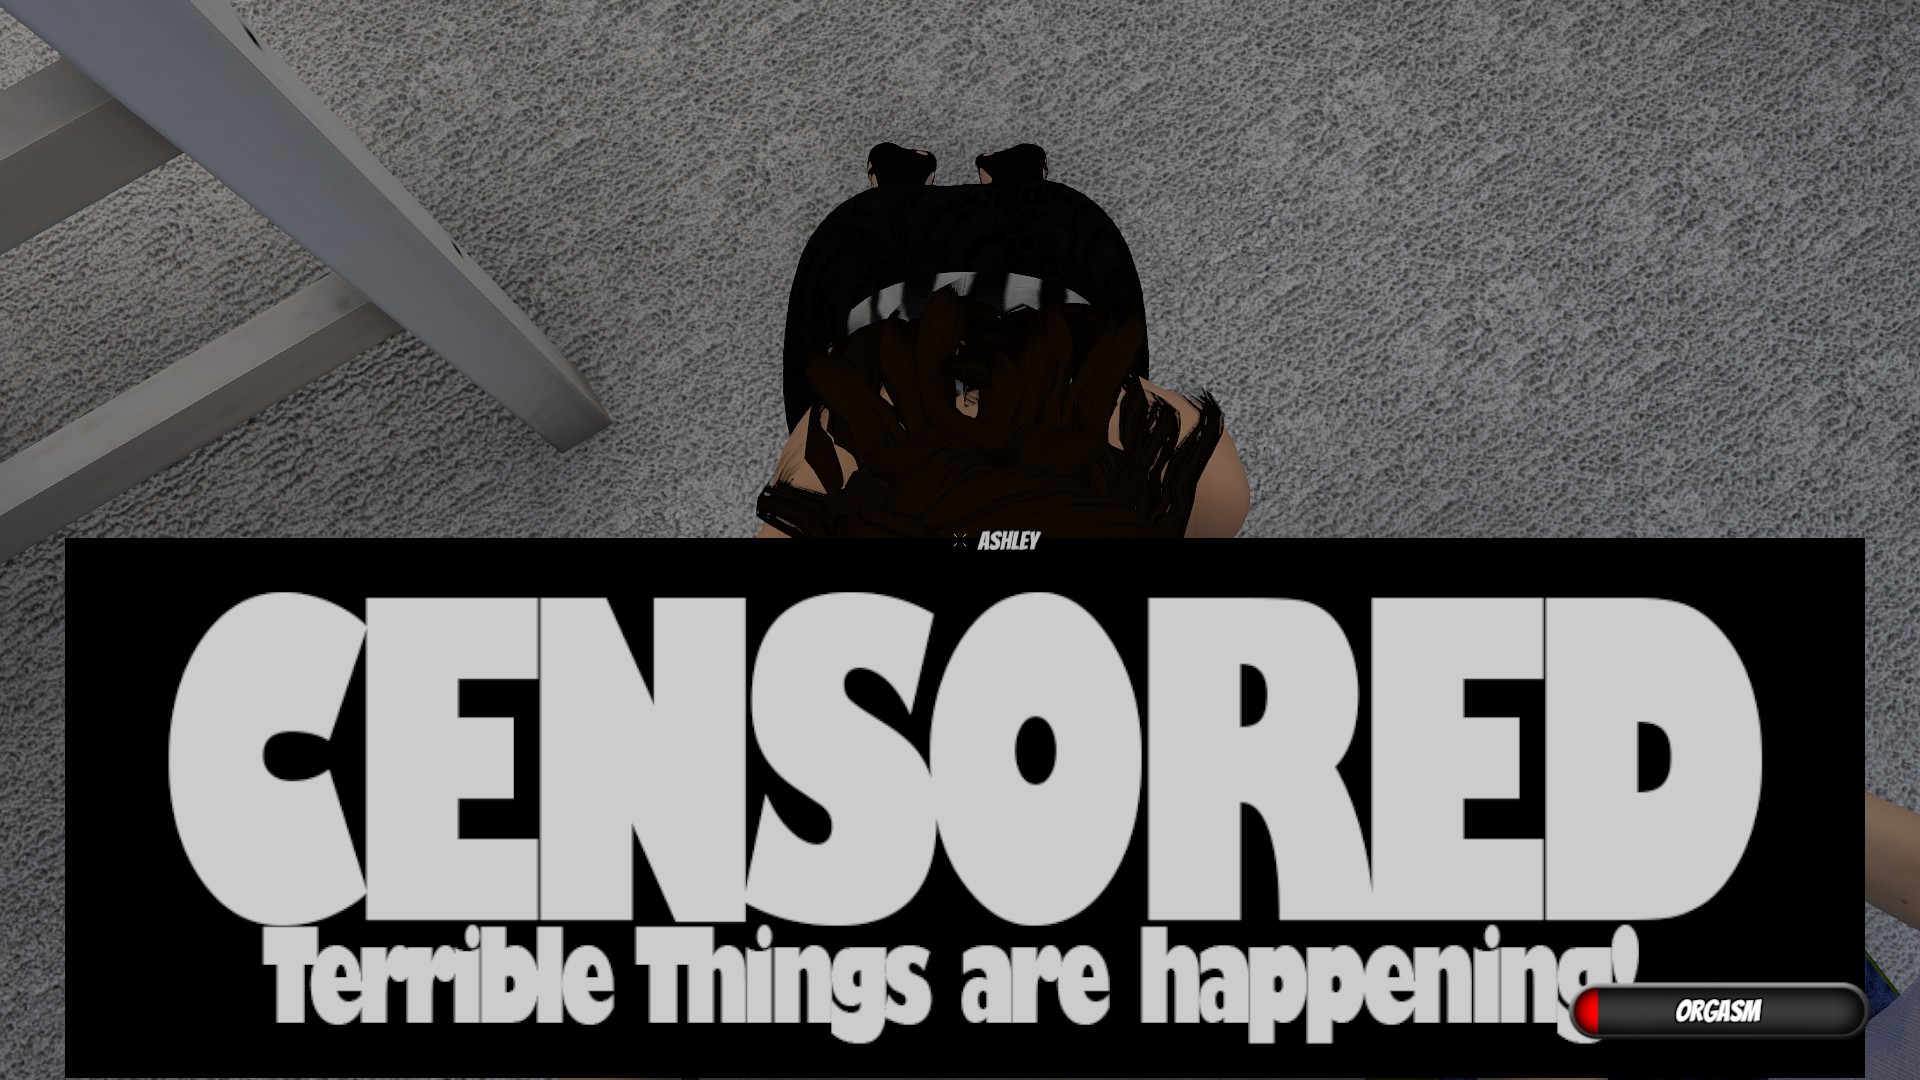 Sex Game House Party Is Back On Steam With Censor Bars But The Harassment Scenes Remain